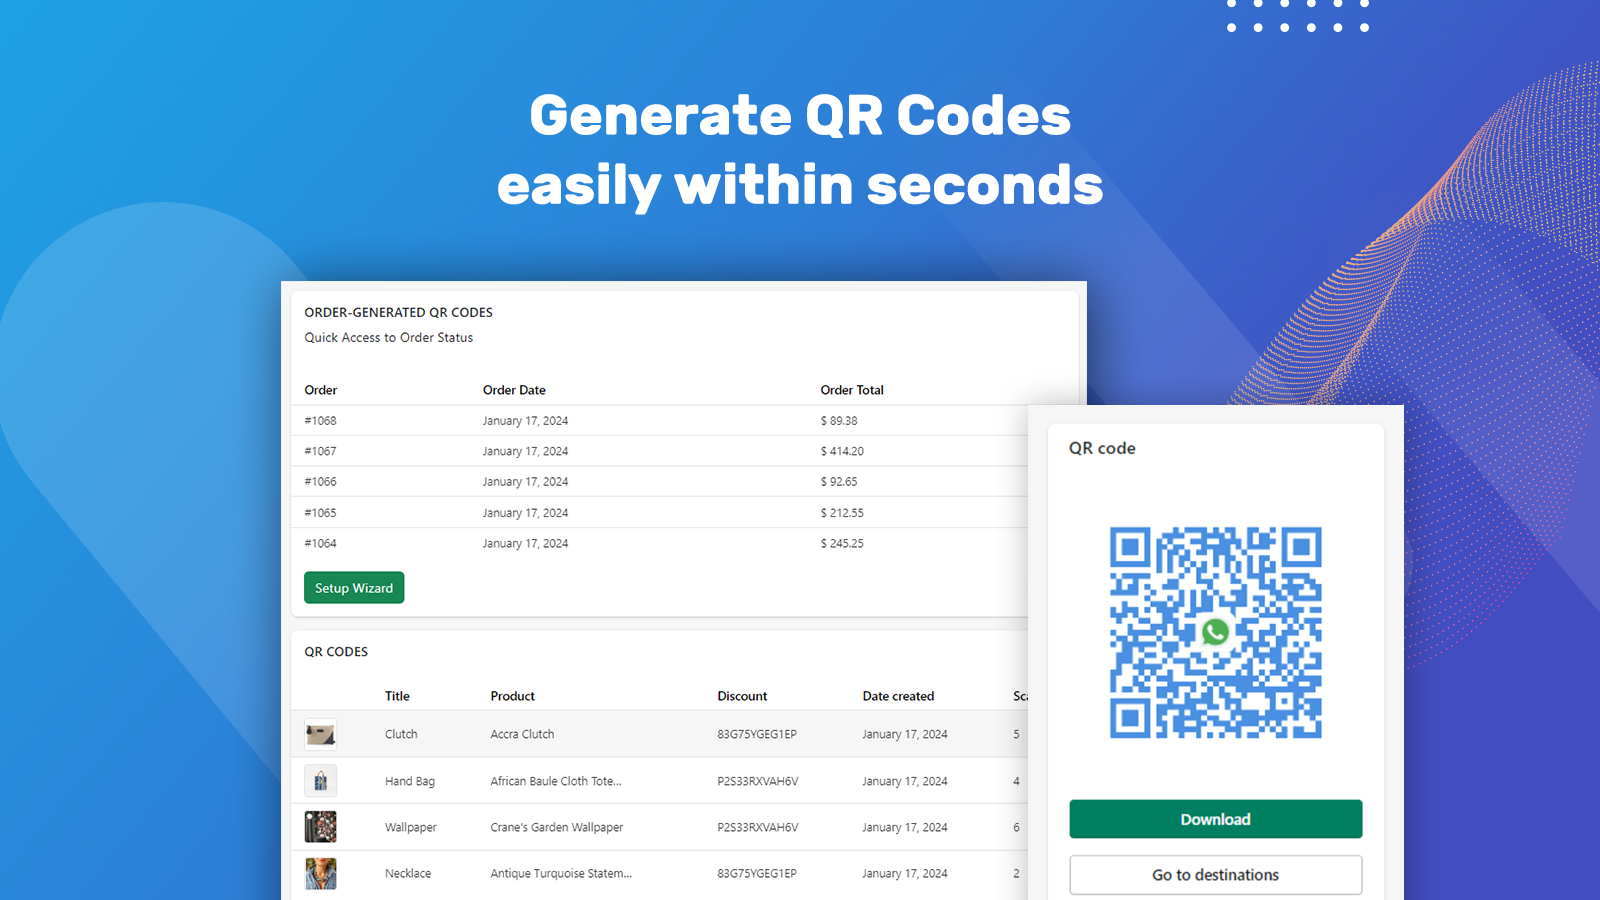 Generate QR codes easily within seconds.